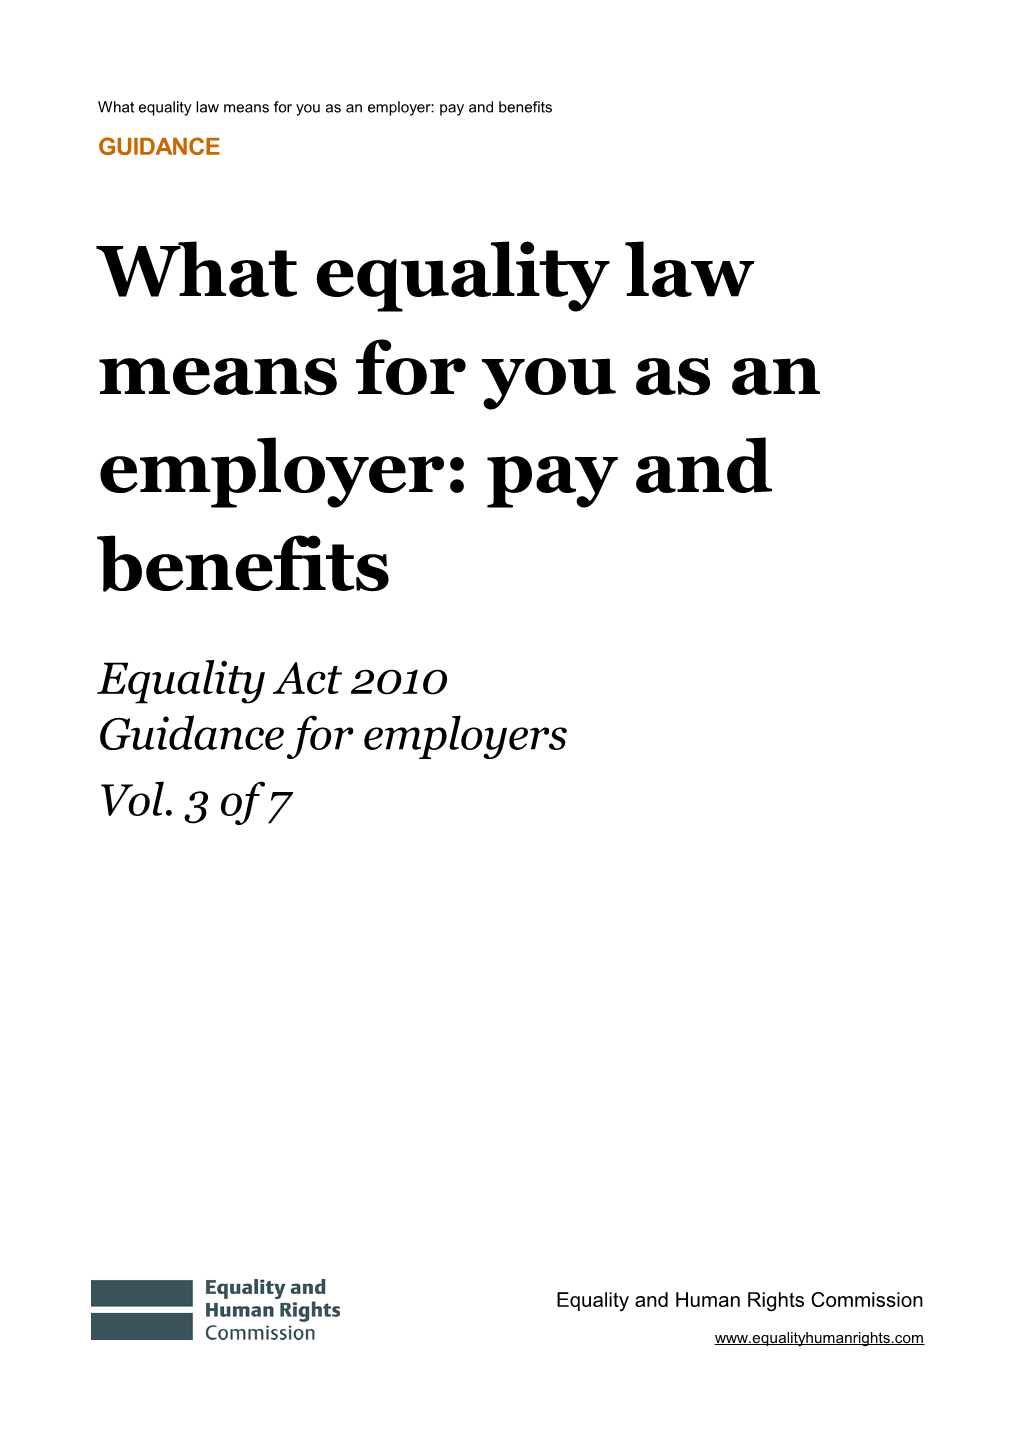 What Equality Law Means